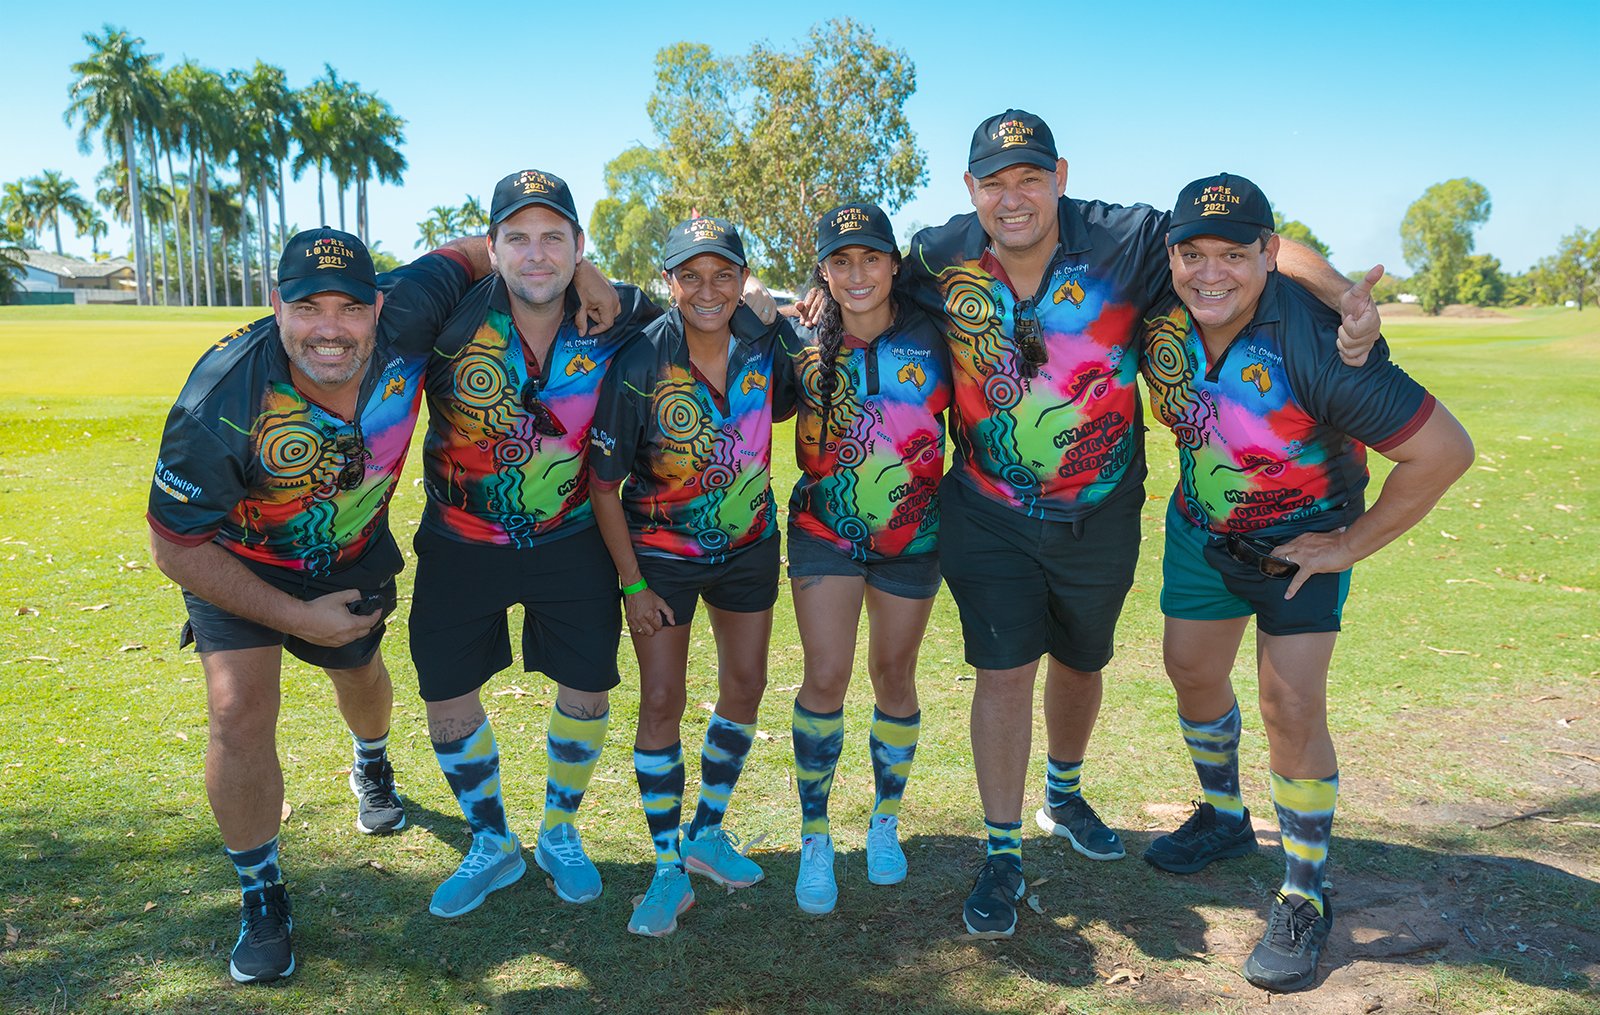 The ‘More Lovein 2021 Team Winners Of The Best Dressed Team At The NAIDOC Golf Event